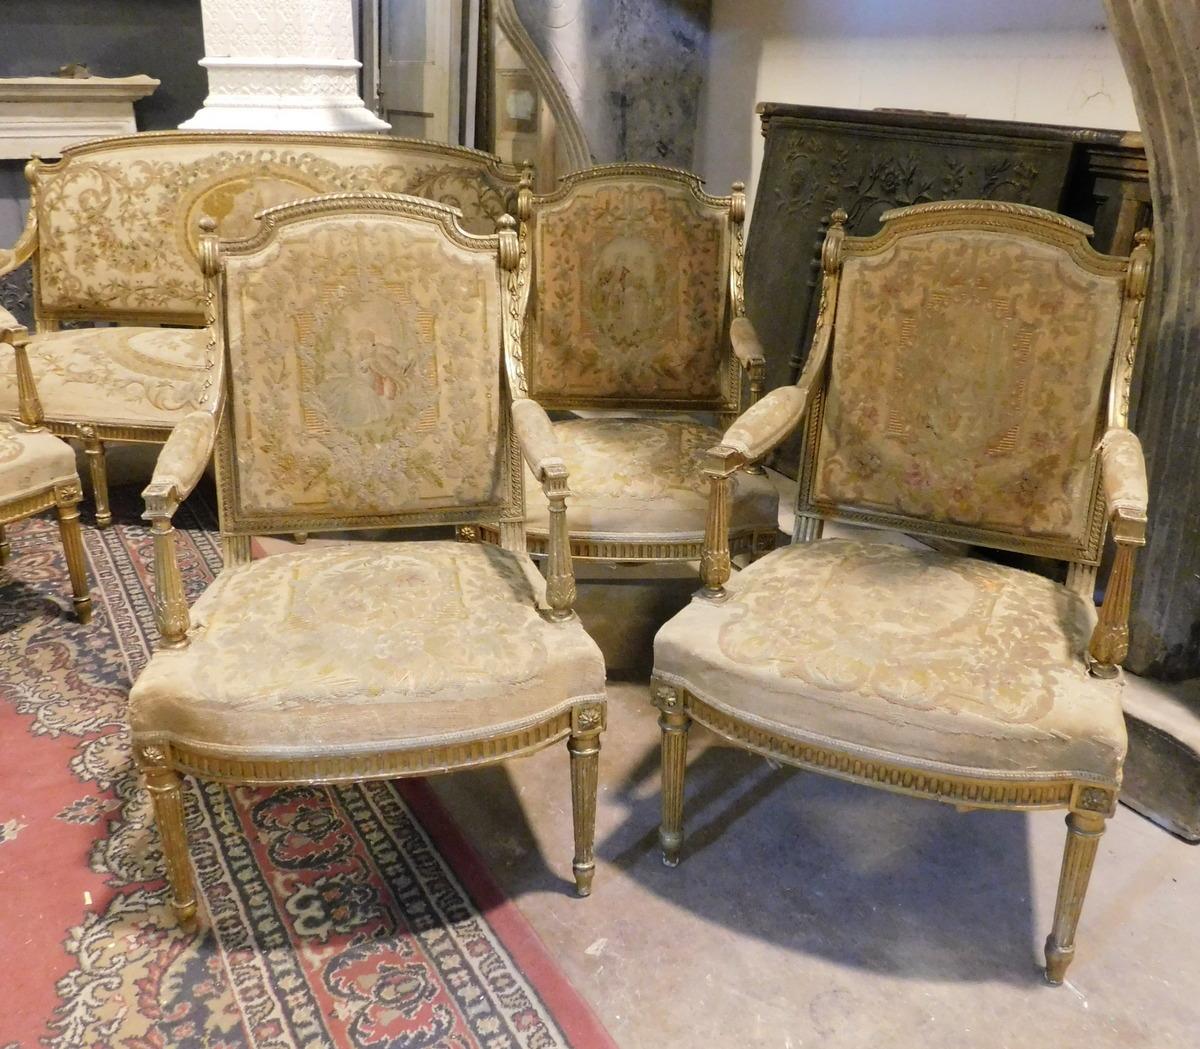 Vintage gilded living room seats, set consisting of a sofa and four armchairs, still original fabric and in good condition, built in the early 20th century, produced by manufacture in Italy.
the sofa measures cm w 165 x h 100 (h seat cm 45) x d 65,